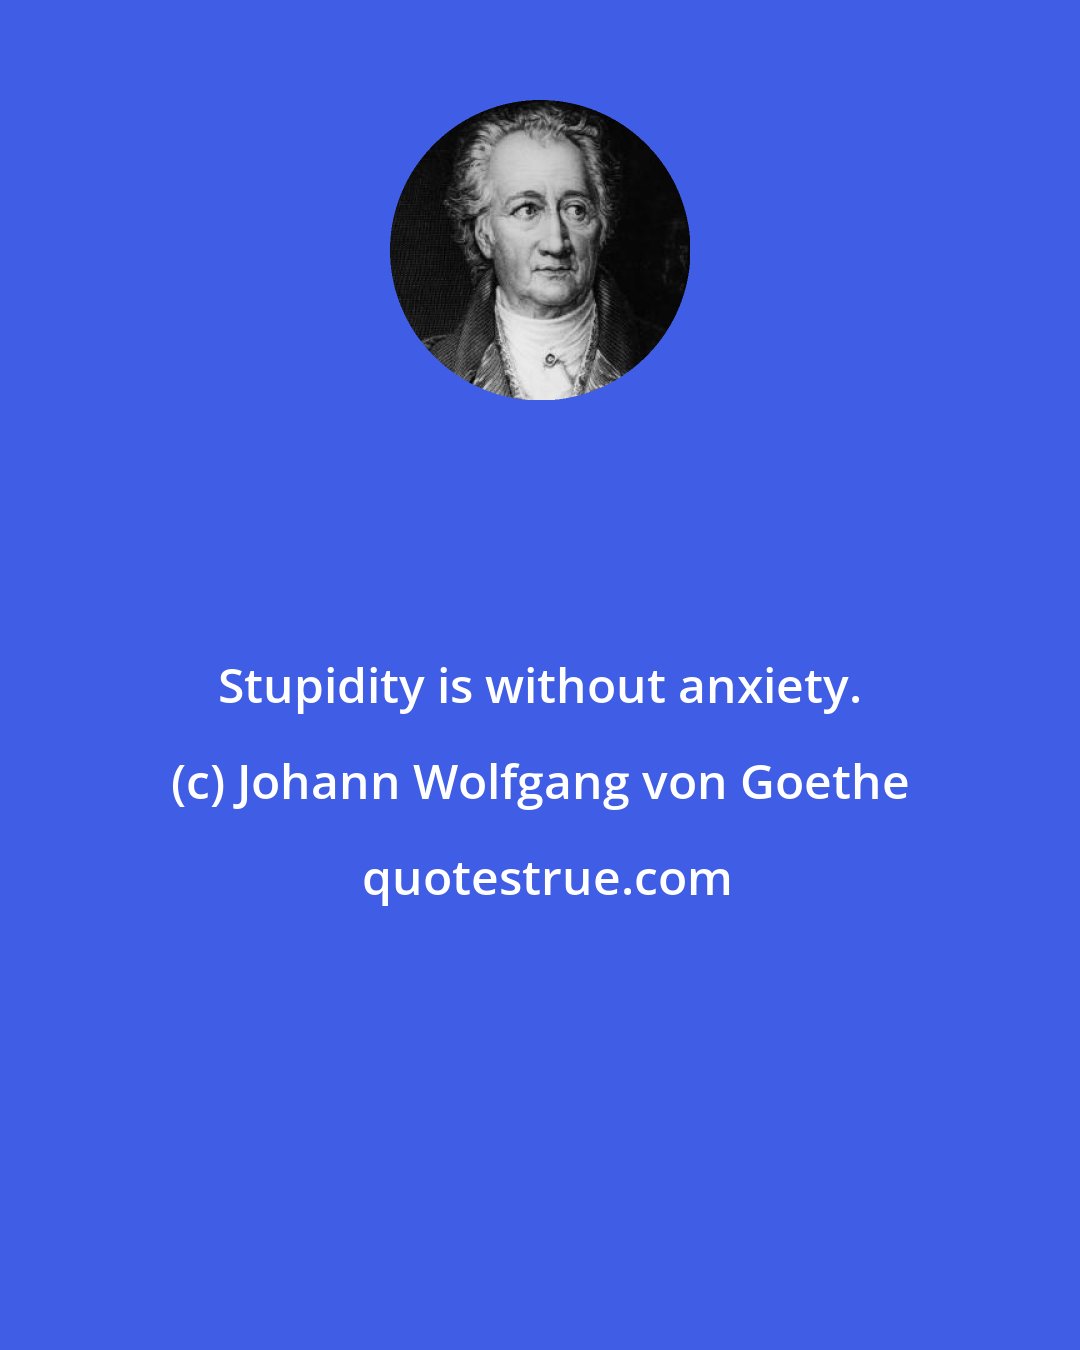 Johann Wolfgang von Goethe: Stupidity is without anxiety.